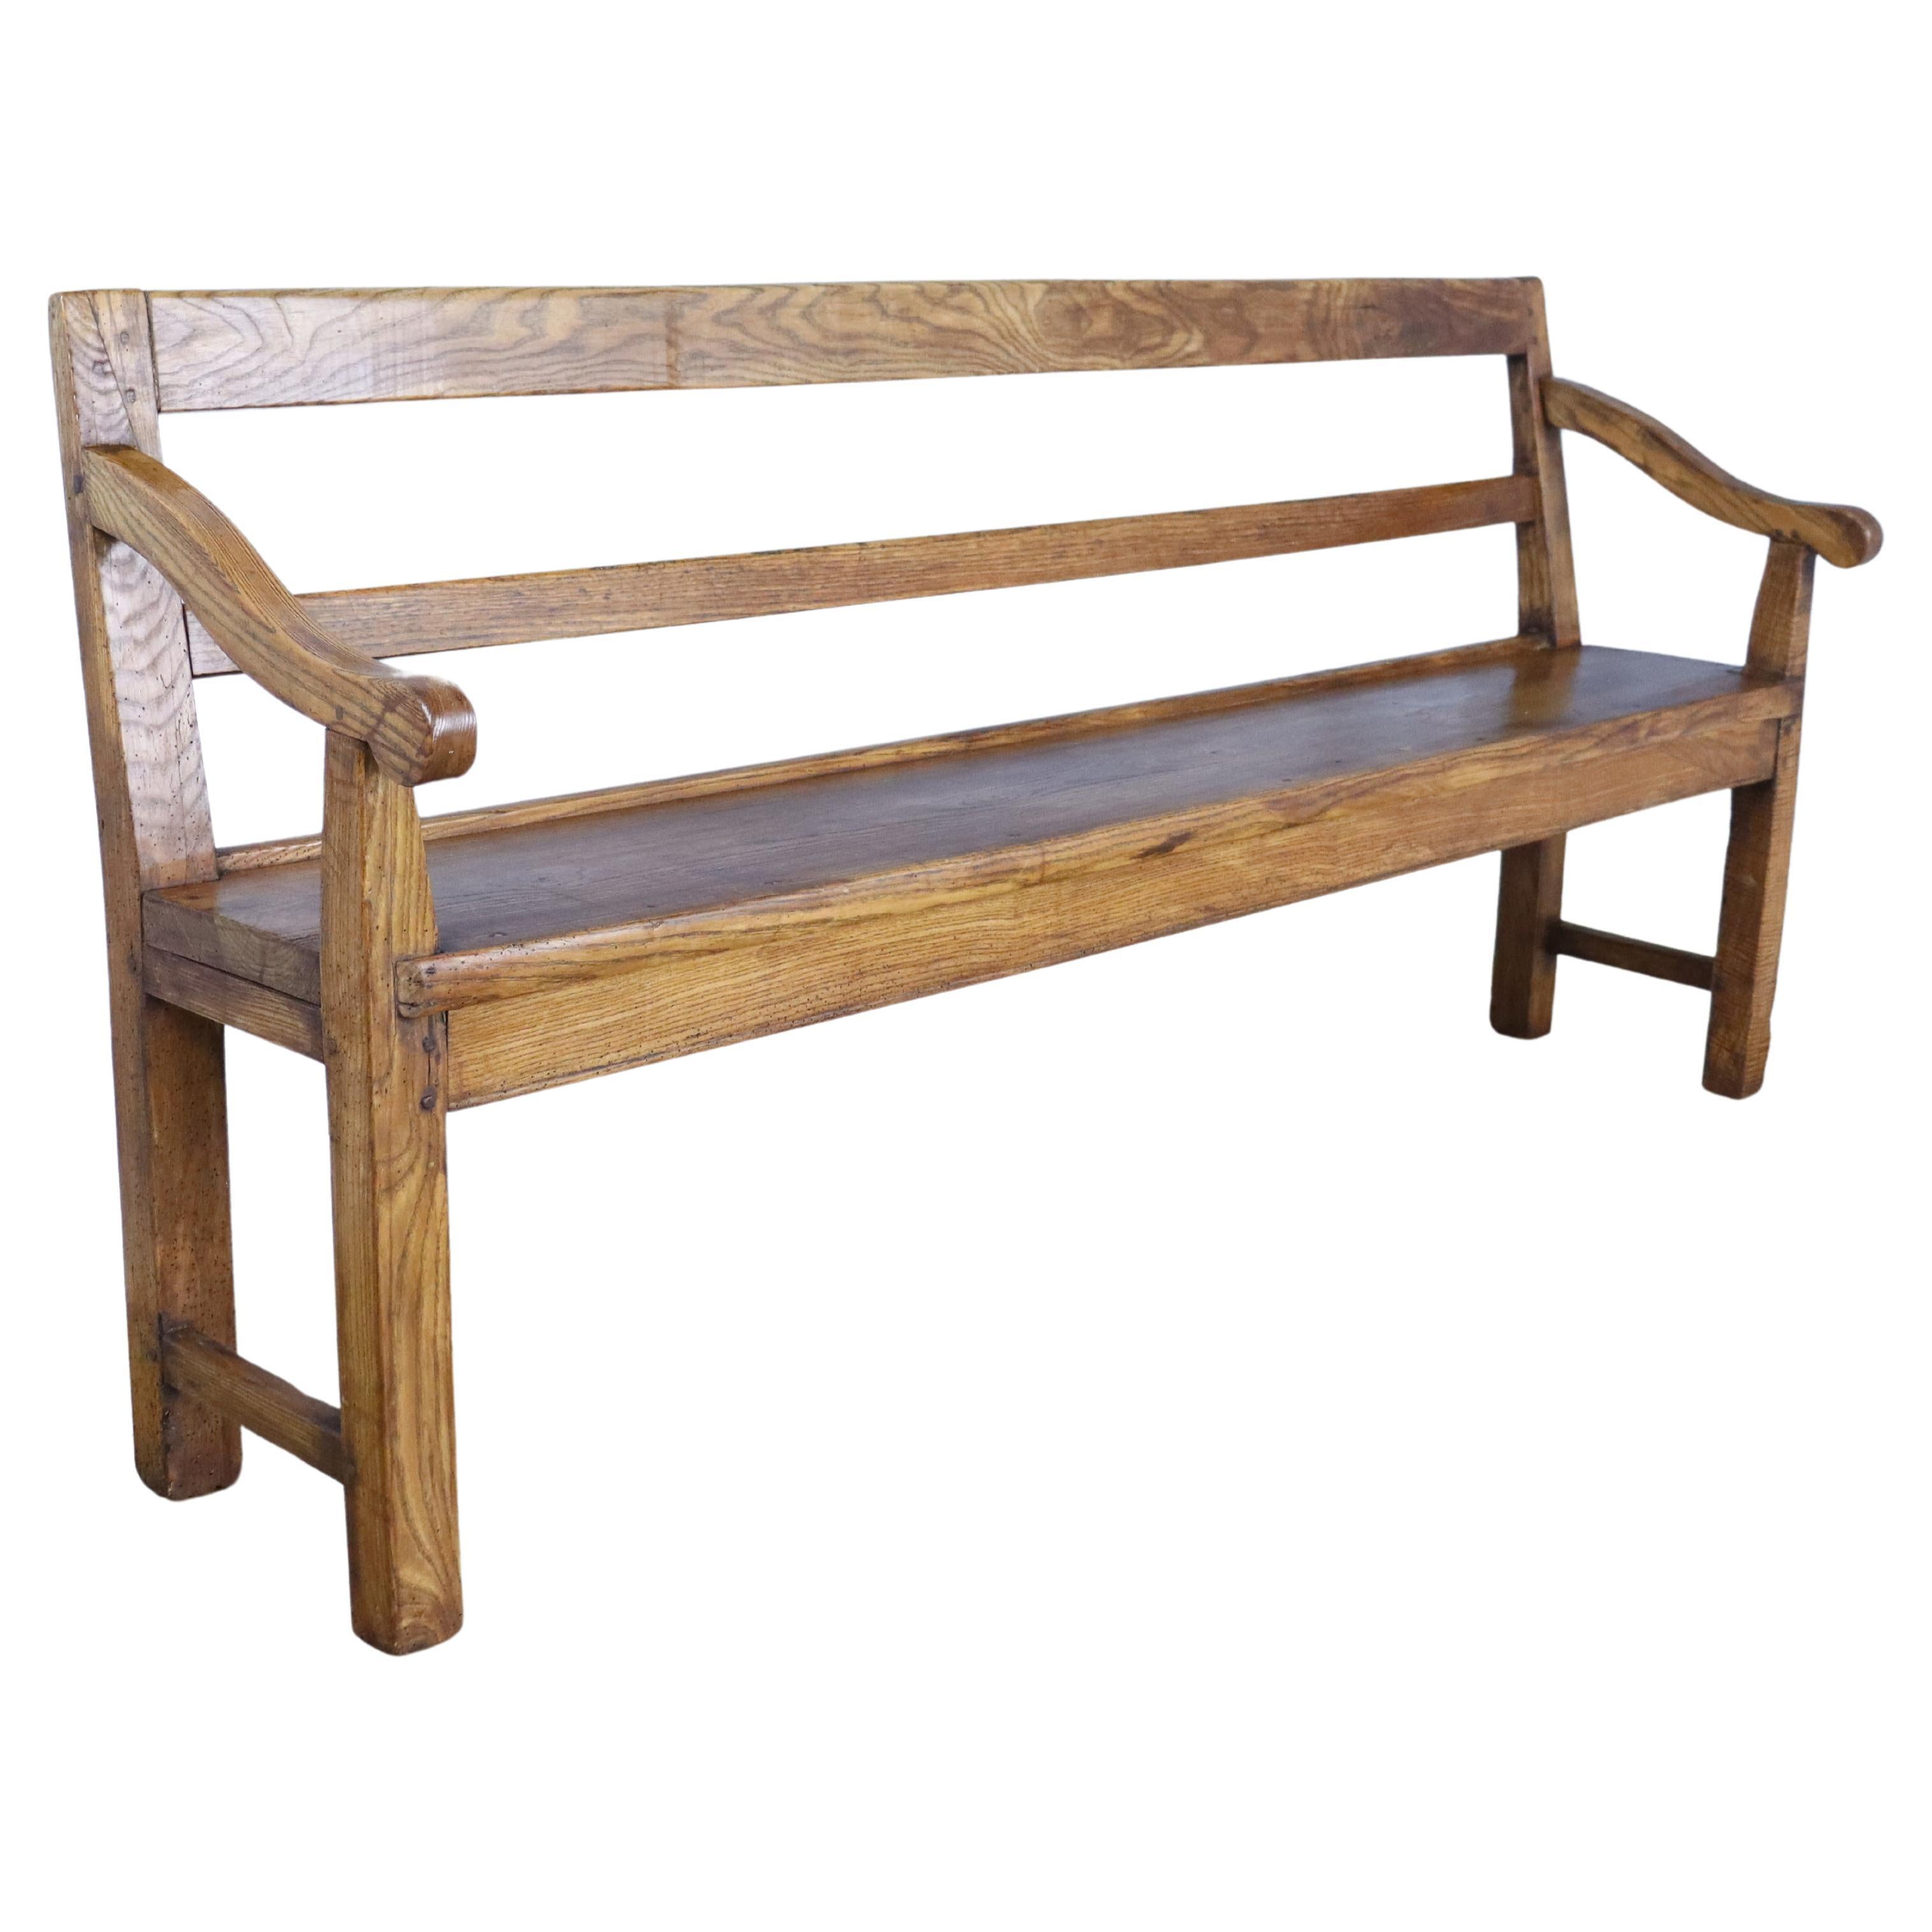 Well Grained Ash Country Bench For Sale